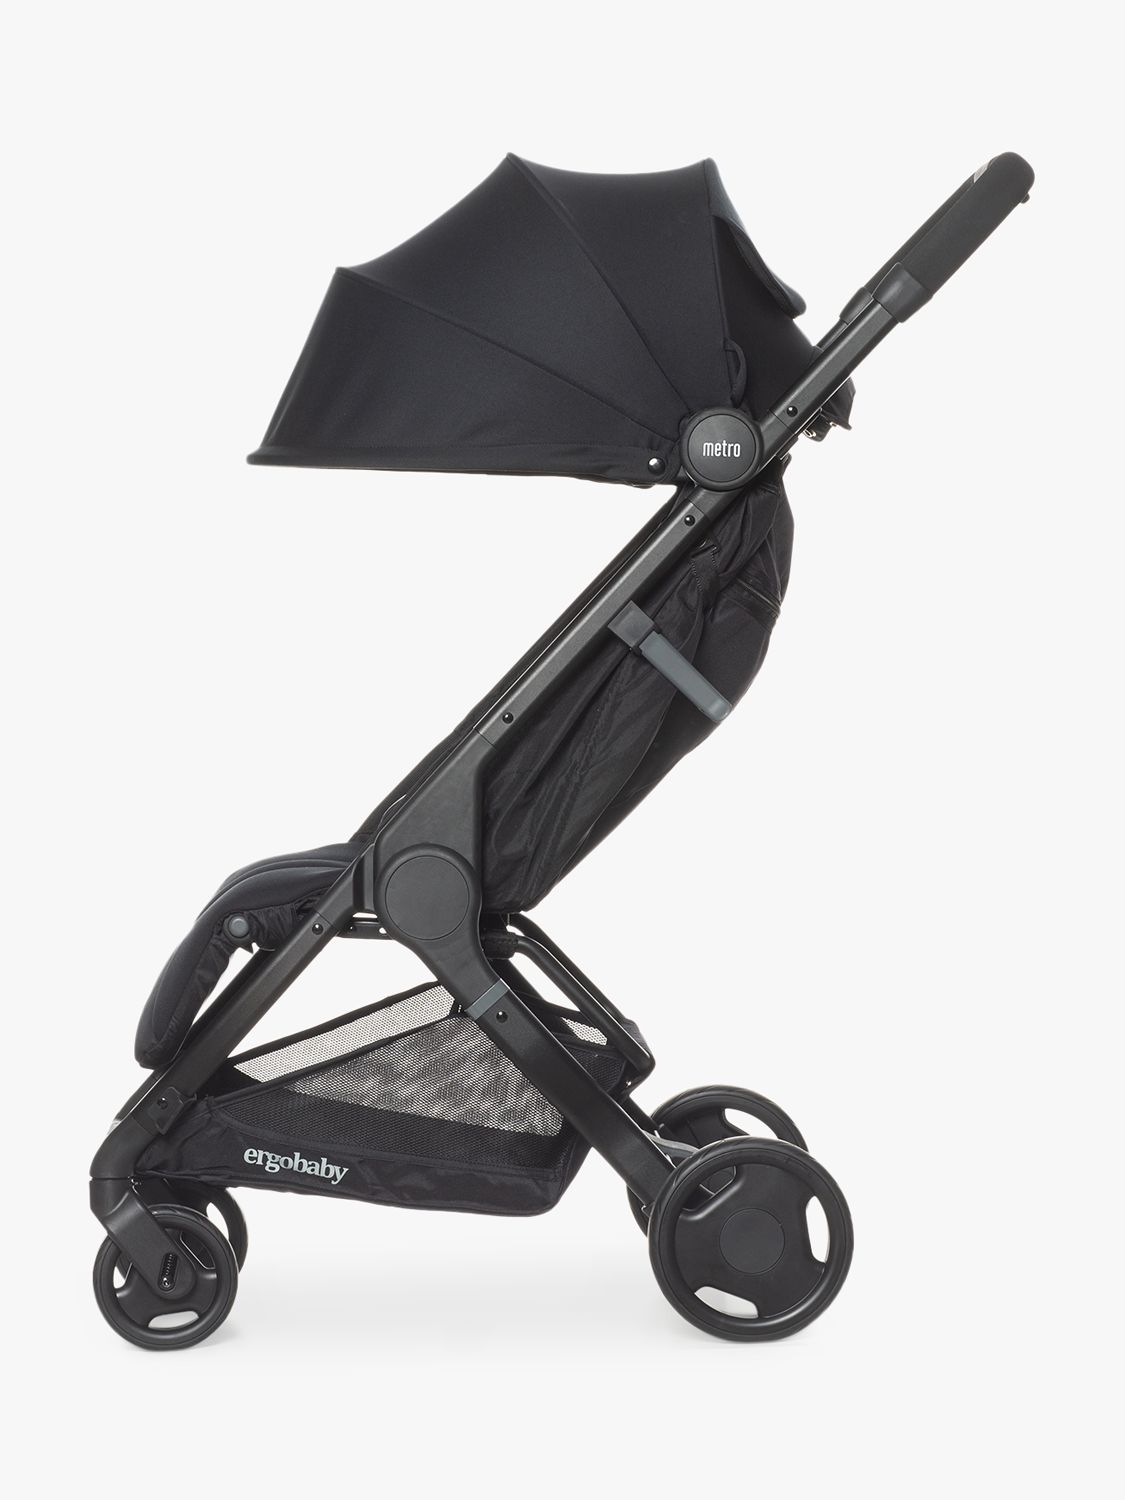 ergobaby compact stroller